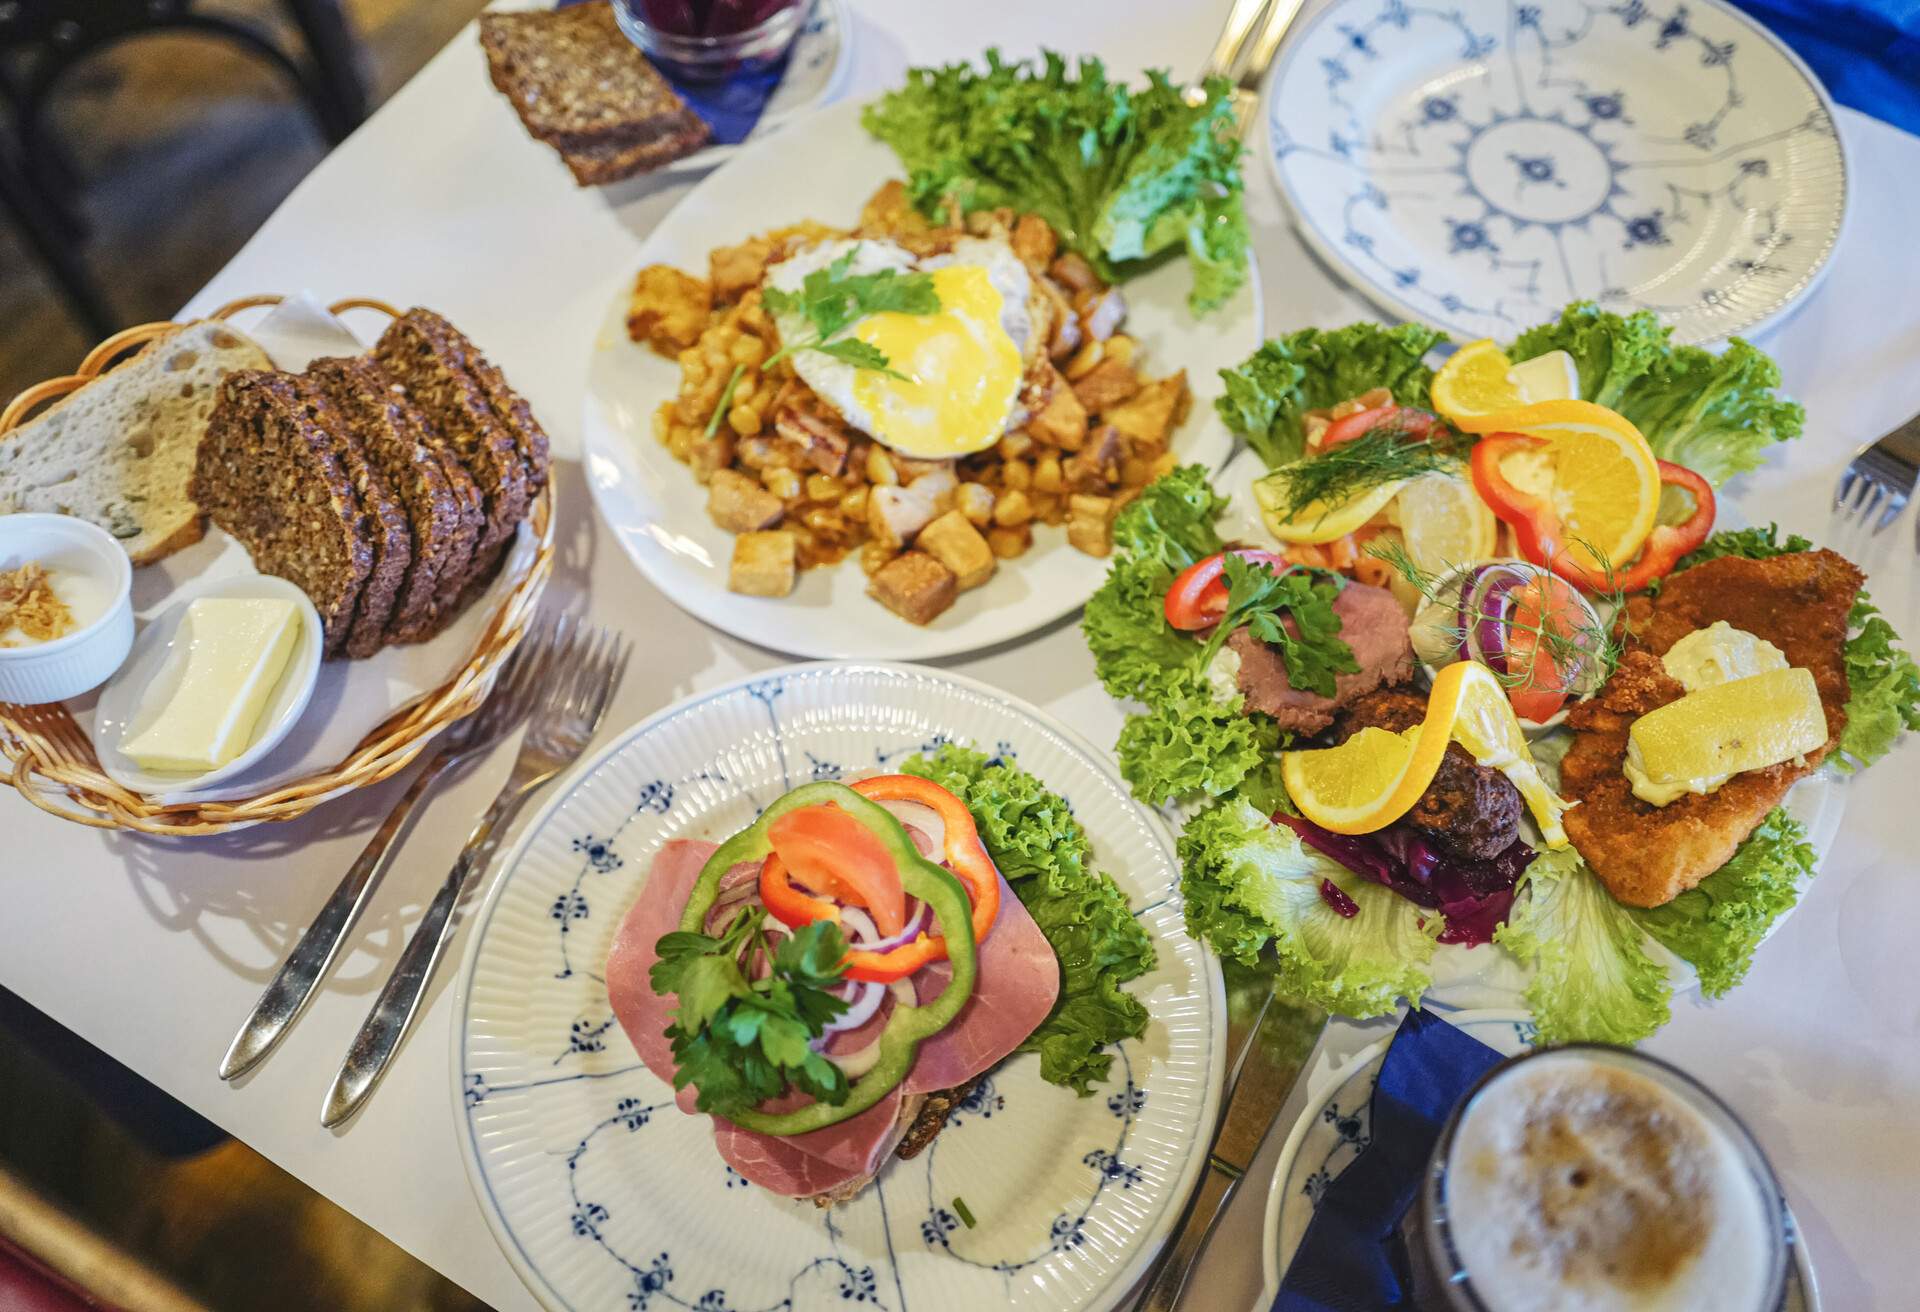 The famous Danish Smorrebrod (Smørrebrød) or open sandwiches made with dark rye breads plus various cold toppings and salads, along with traditional Biksemad of fried meat, potatoes, onions and eggs in Copenhagen, Denmark.